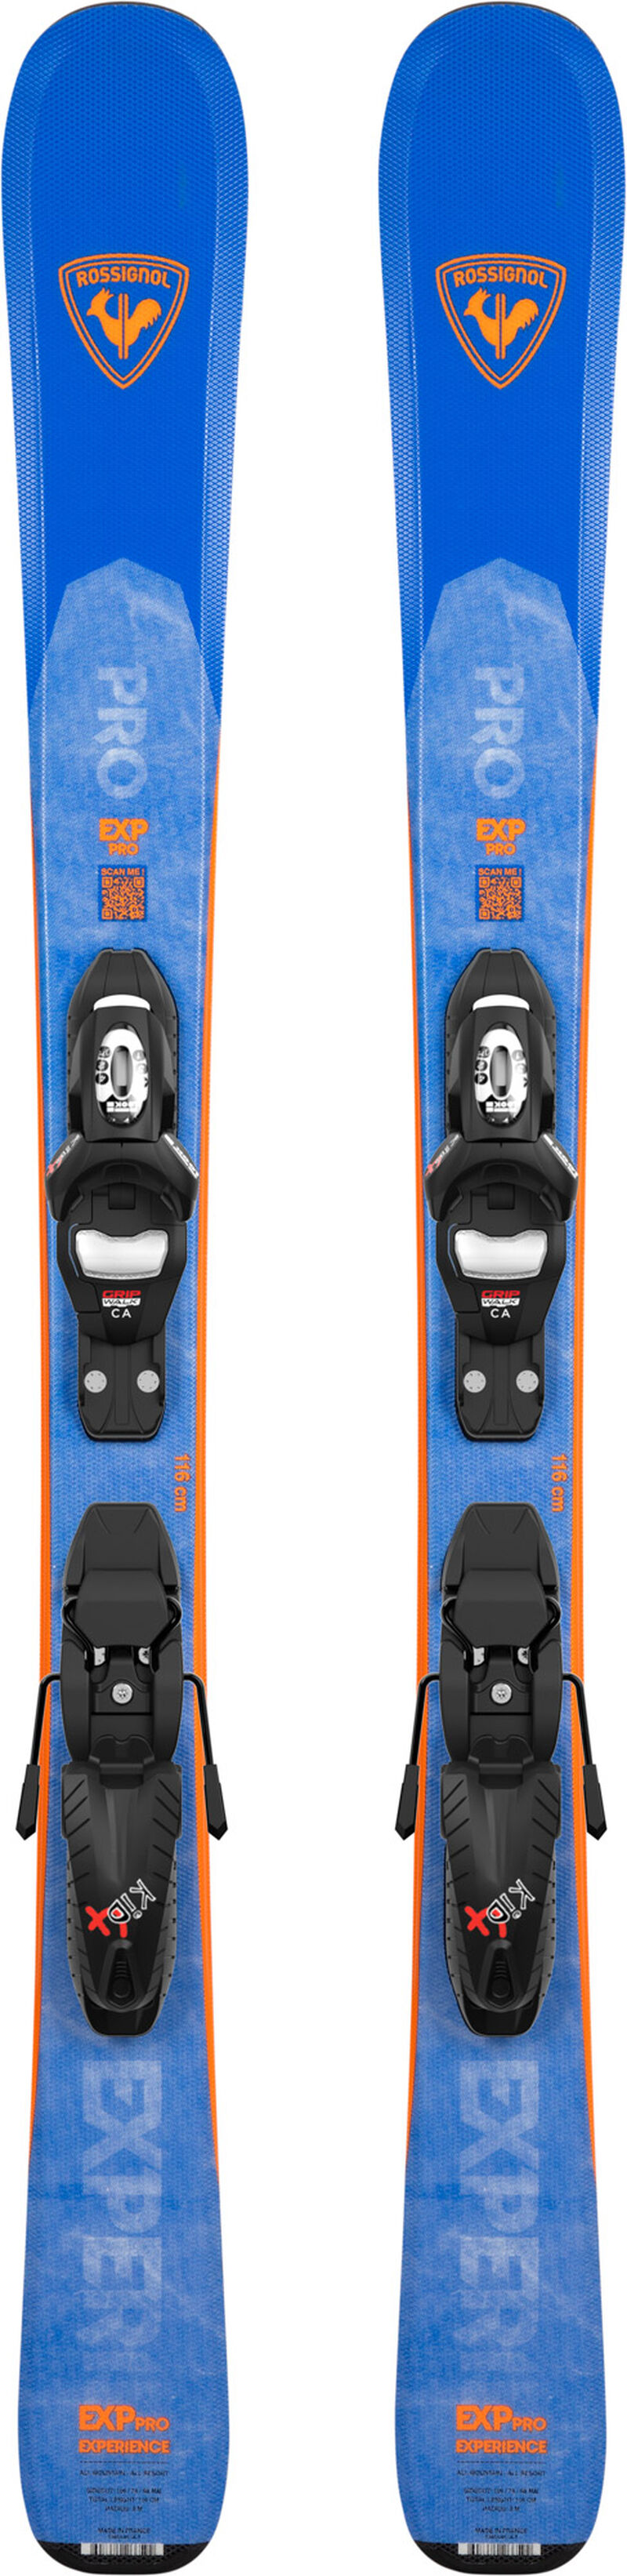 Rossignol KINDER ALL MOUNTAIN SKIER EXPERIENCE PRO (KID-X) 